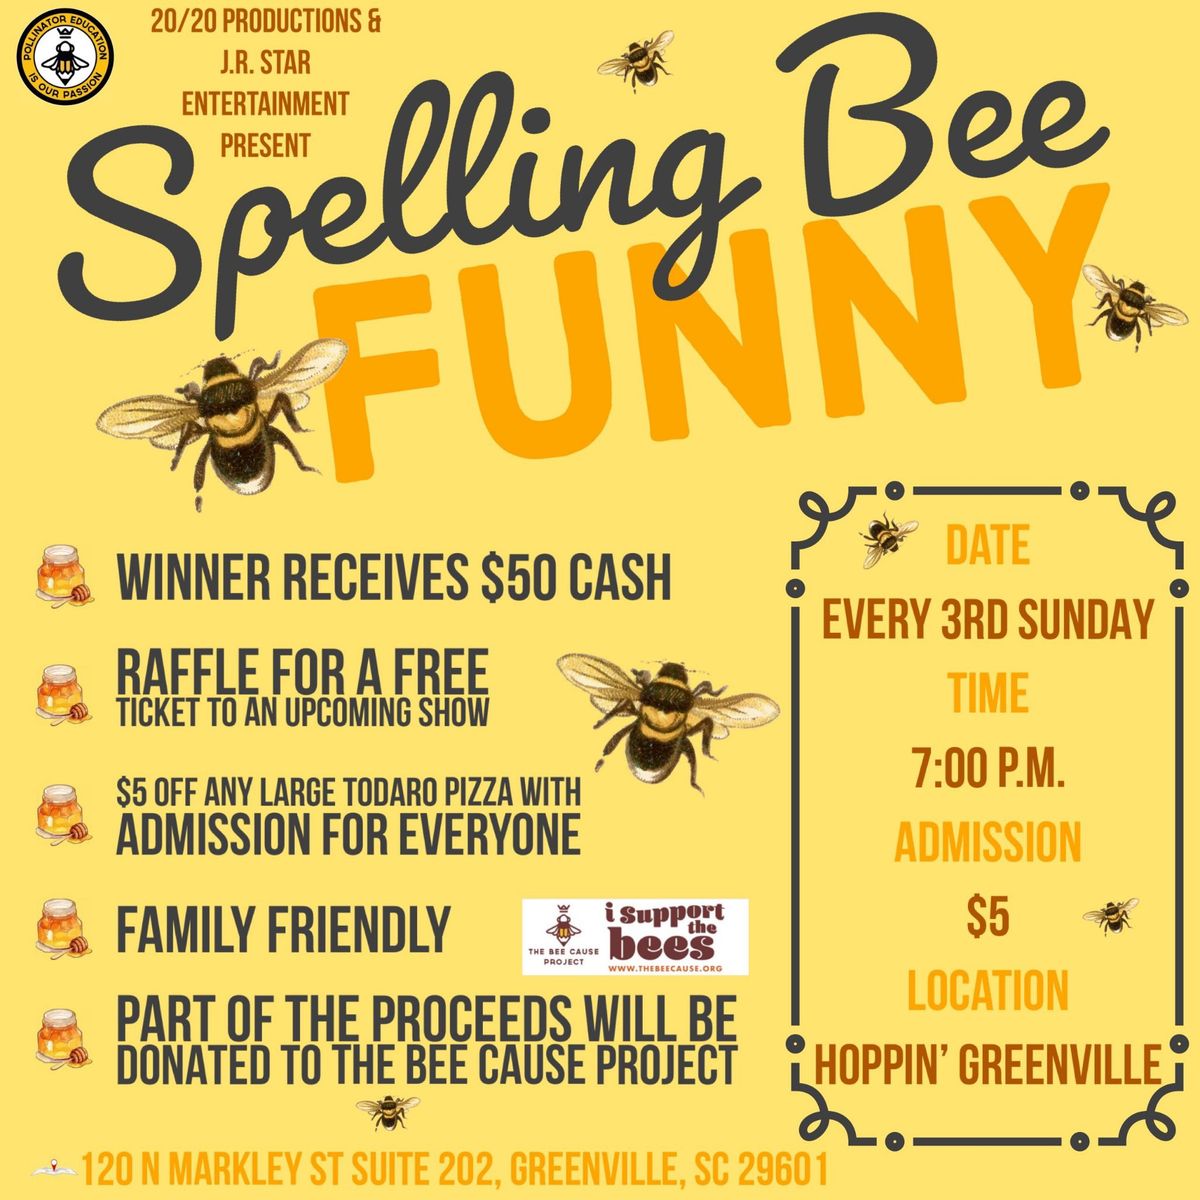 Spelling Bee Funny - May 19